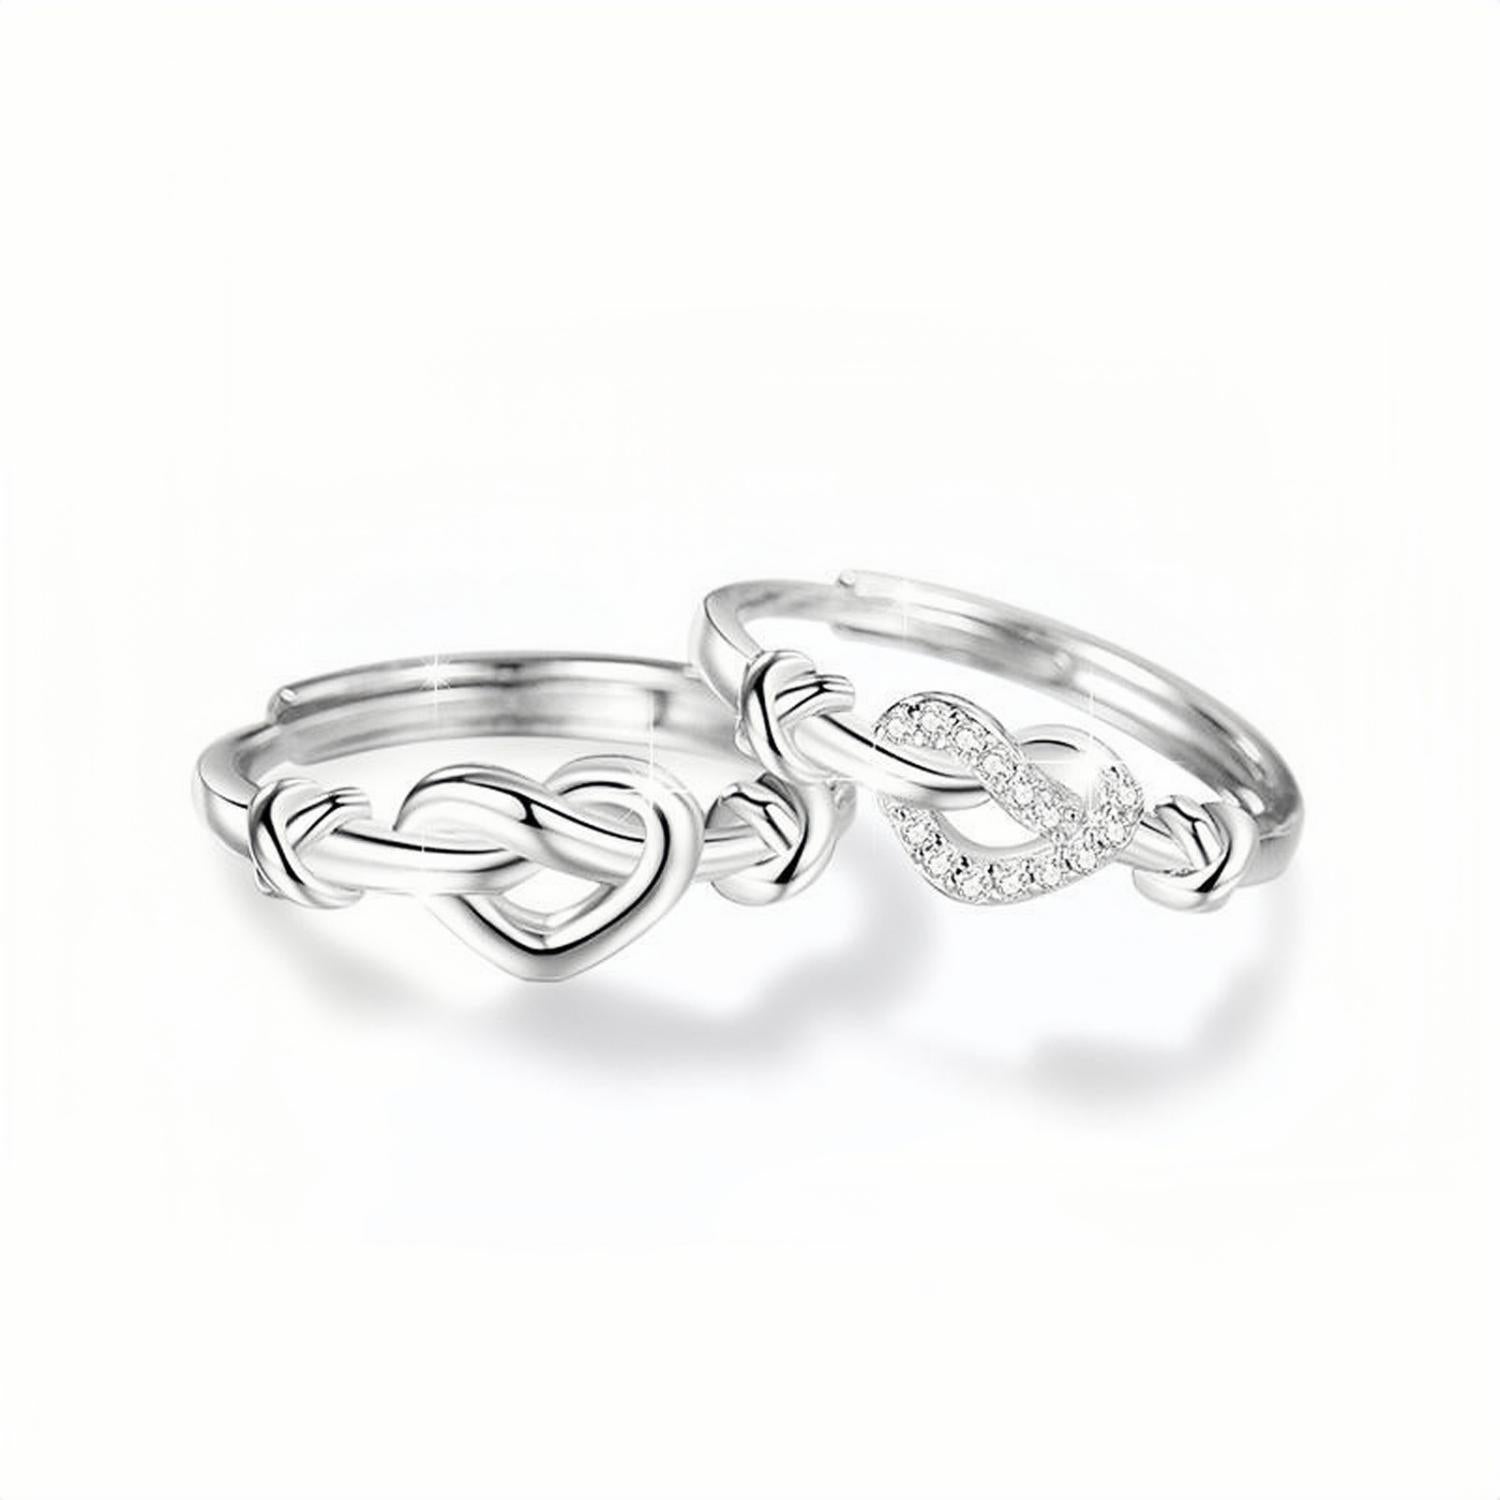 Adjustable Infinity Knot Matching Heart Promise Rings Sets In Sterling Silver - CoupleSets